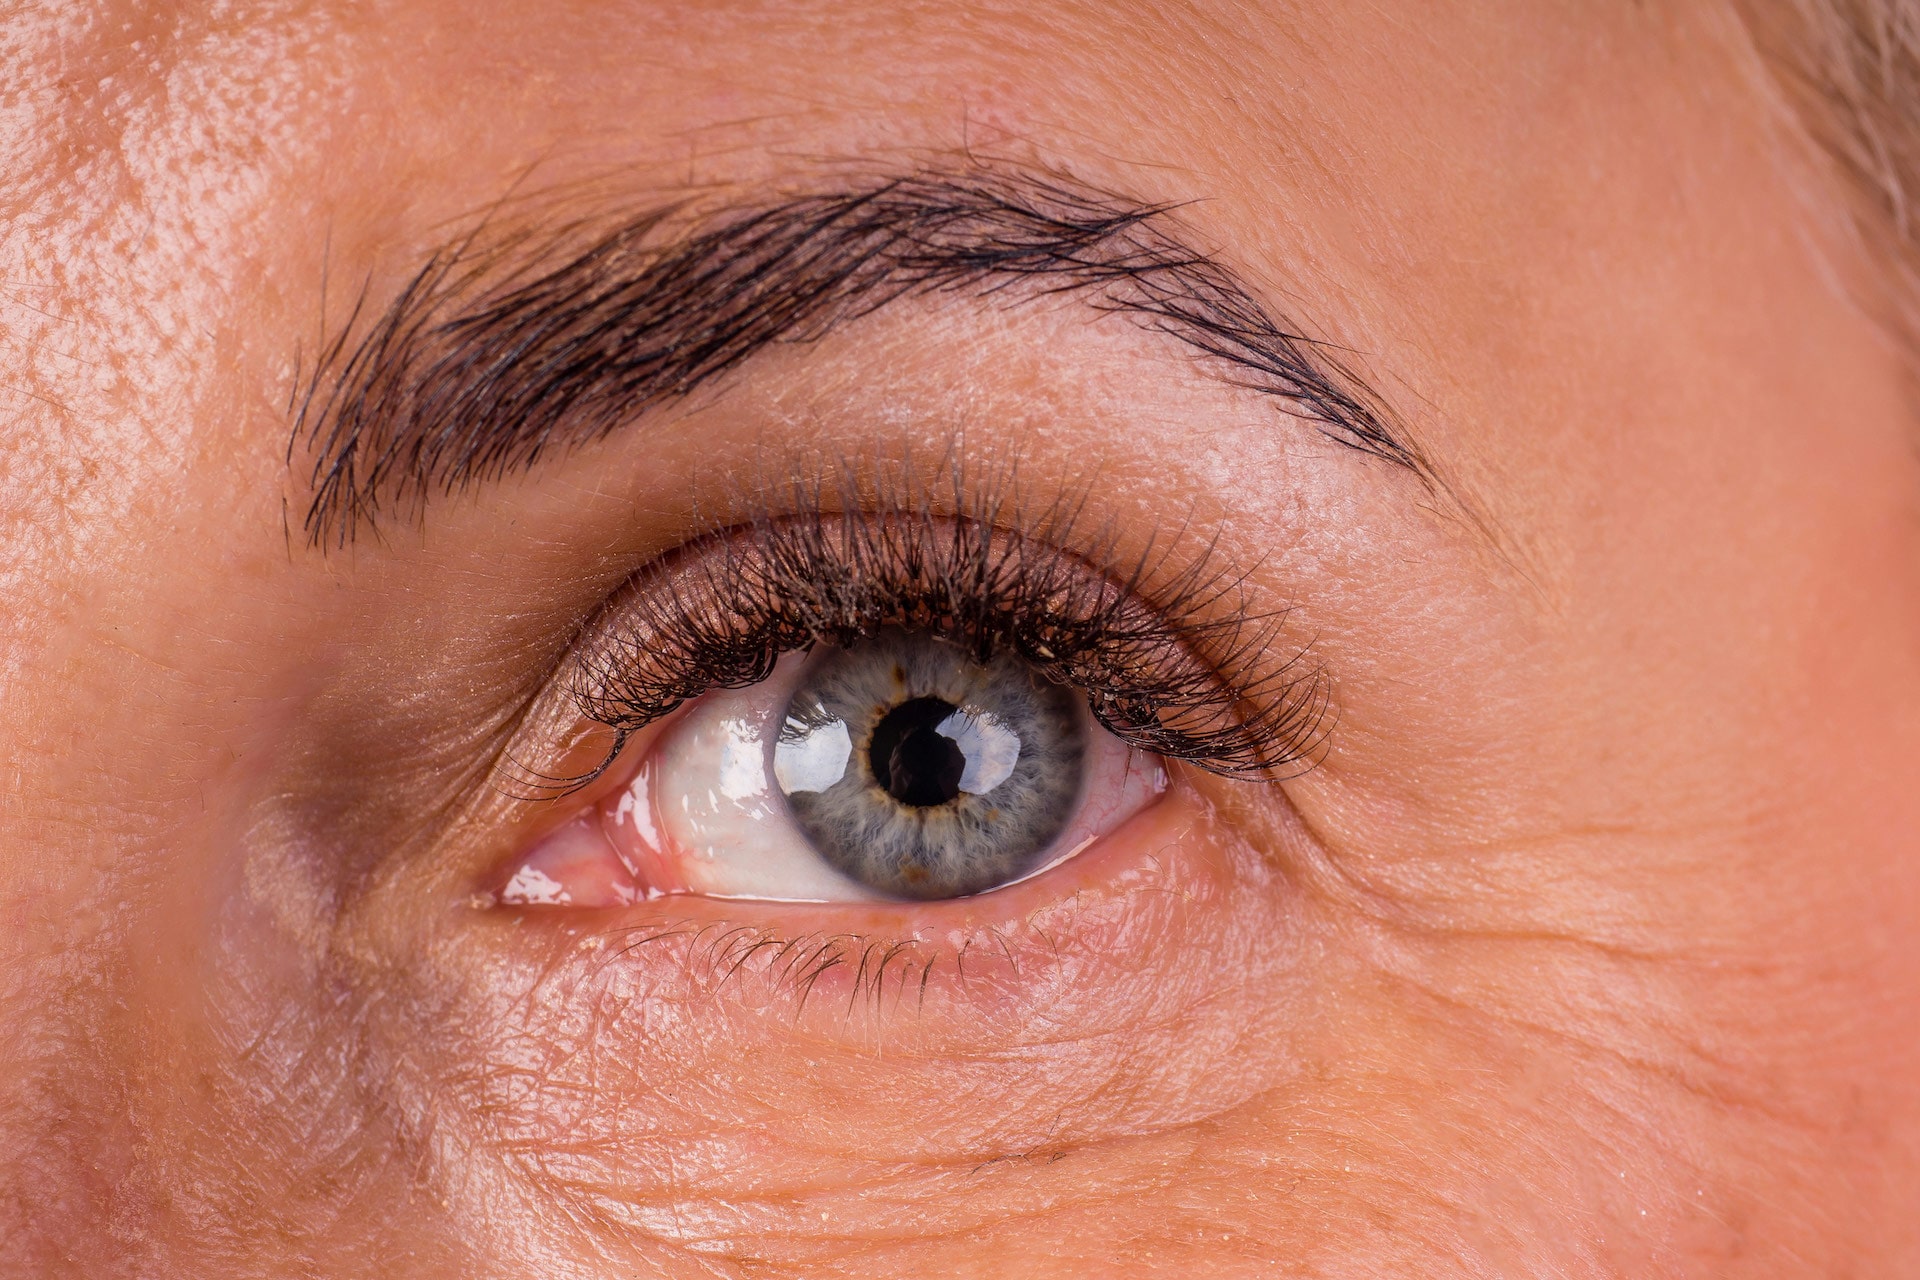 close up image of a woman's eye